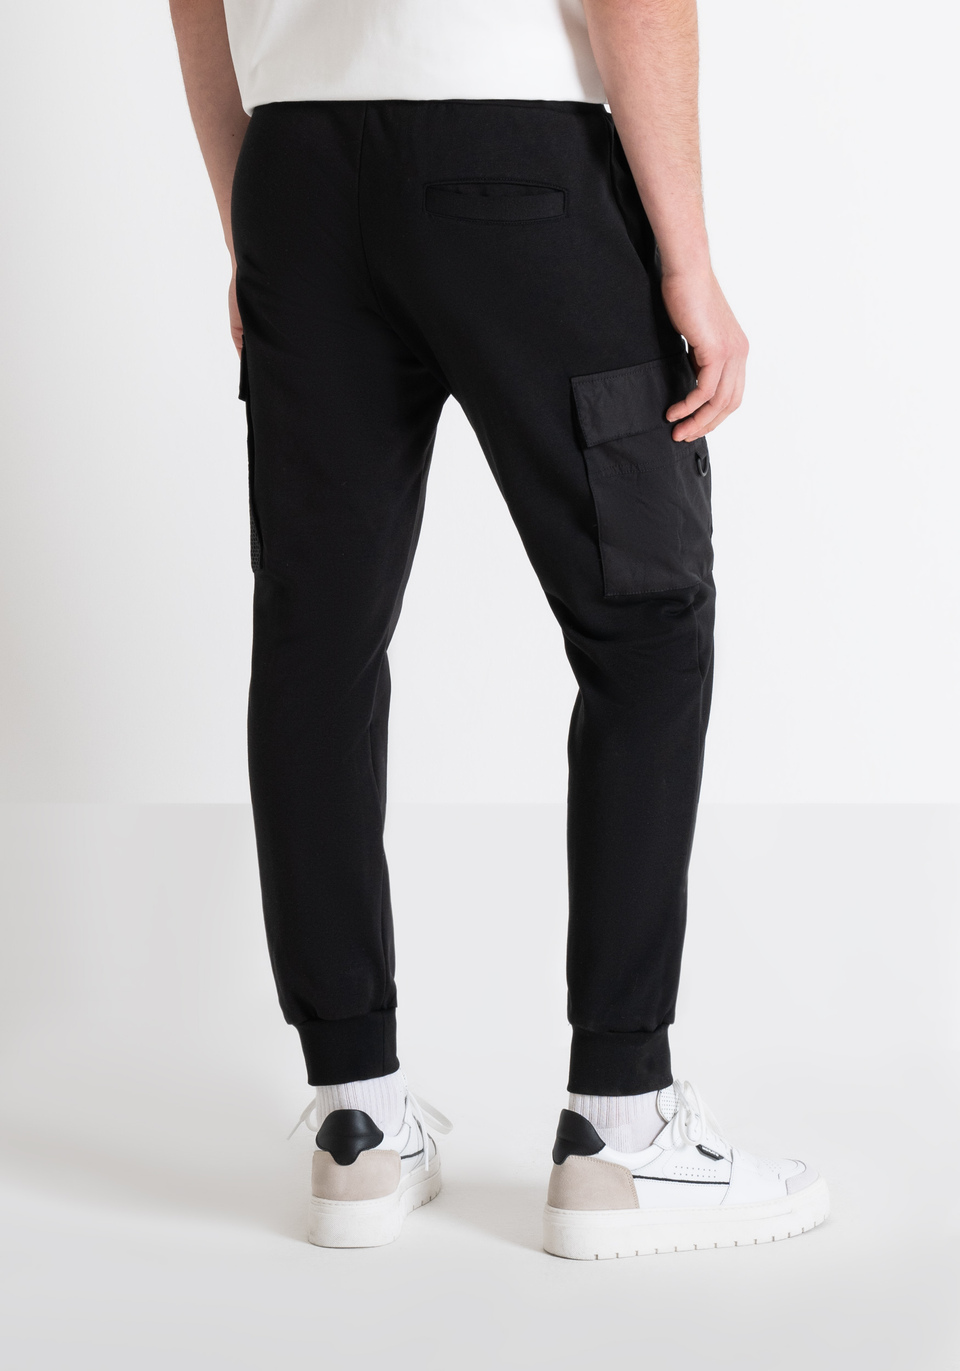 REGULAR FIT SWEATPANTS IN SUSTAINABLE COTTON-POLYESTER BLEND WITH LOGO PATCH - Antony Morato Online Shop